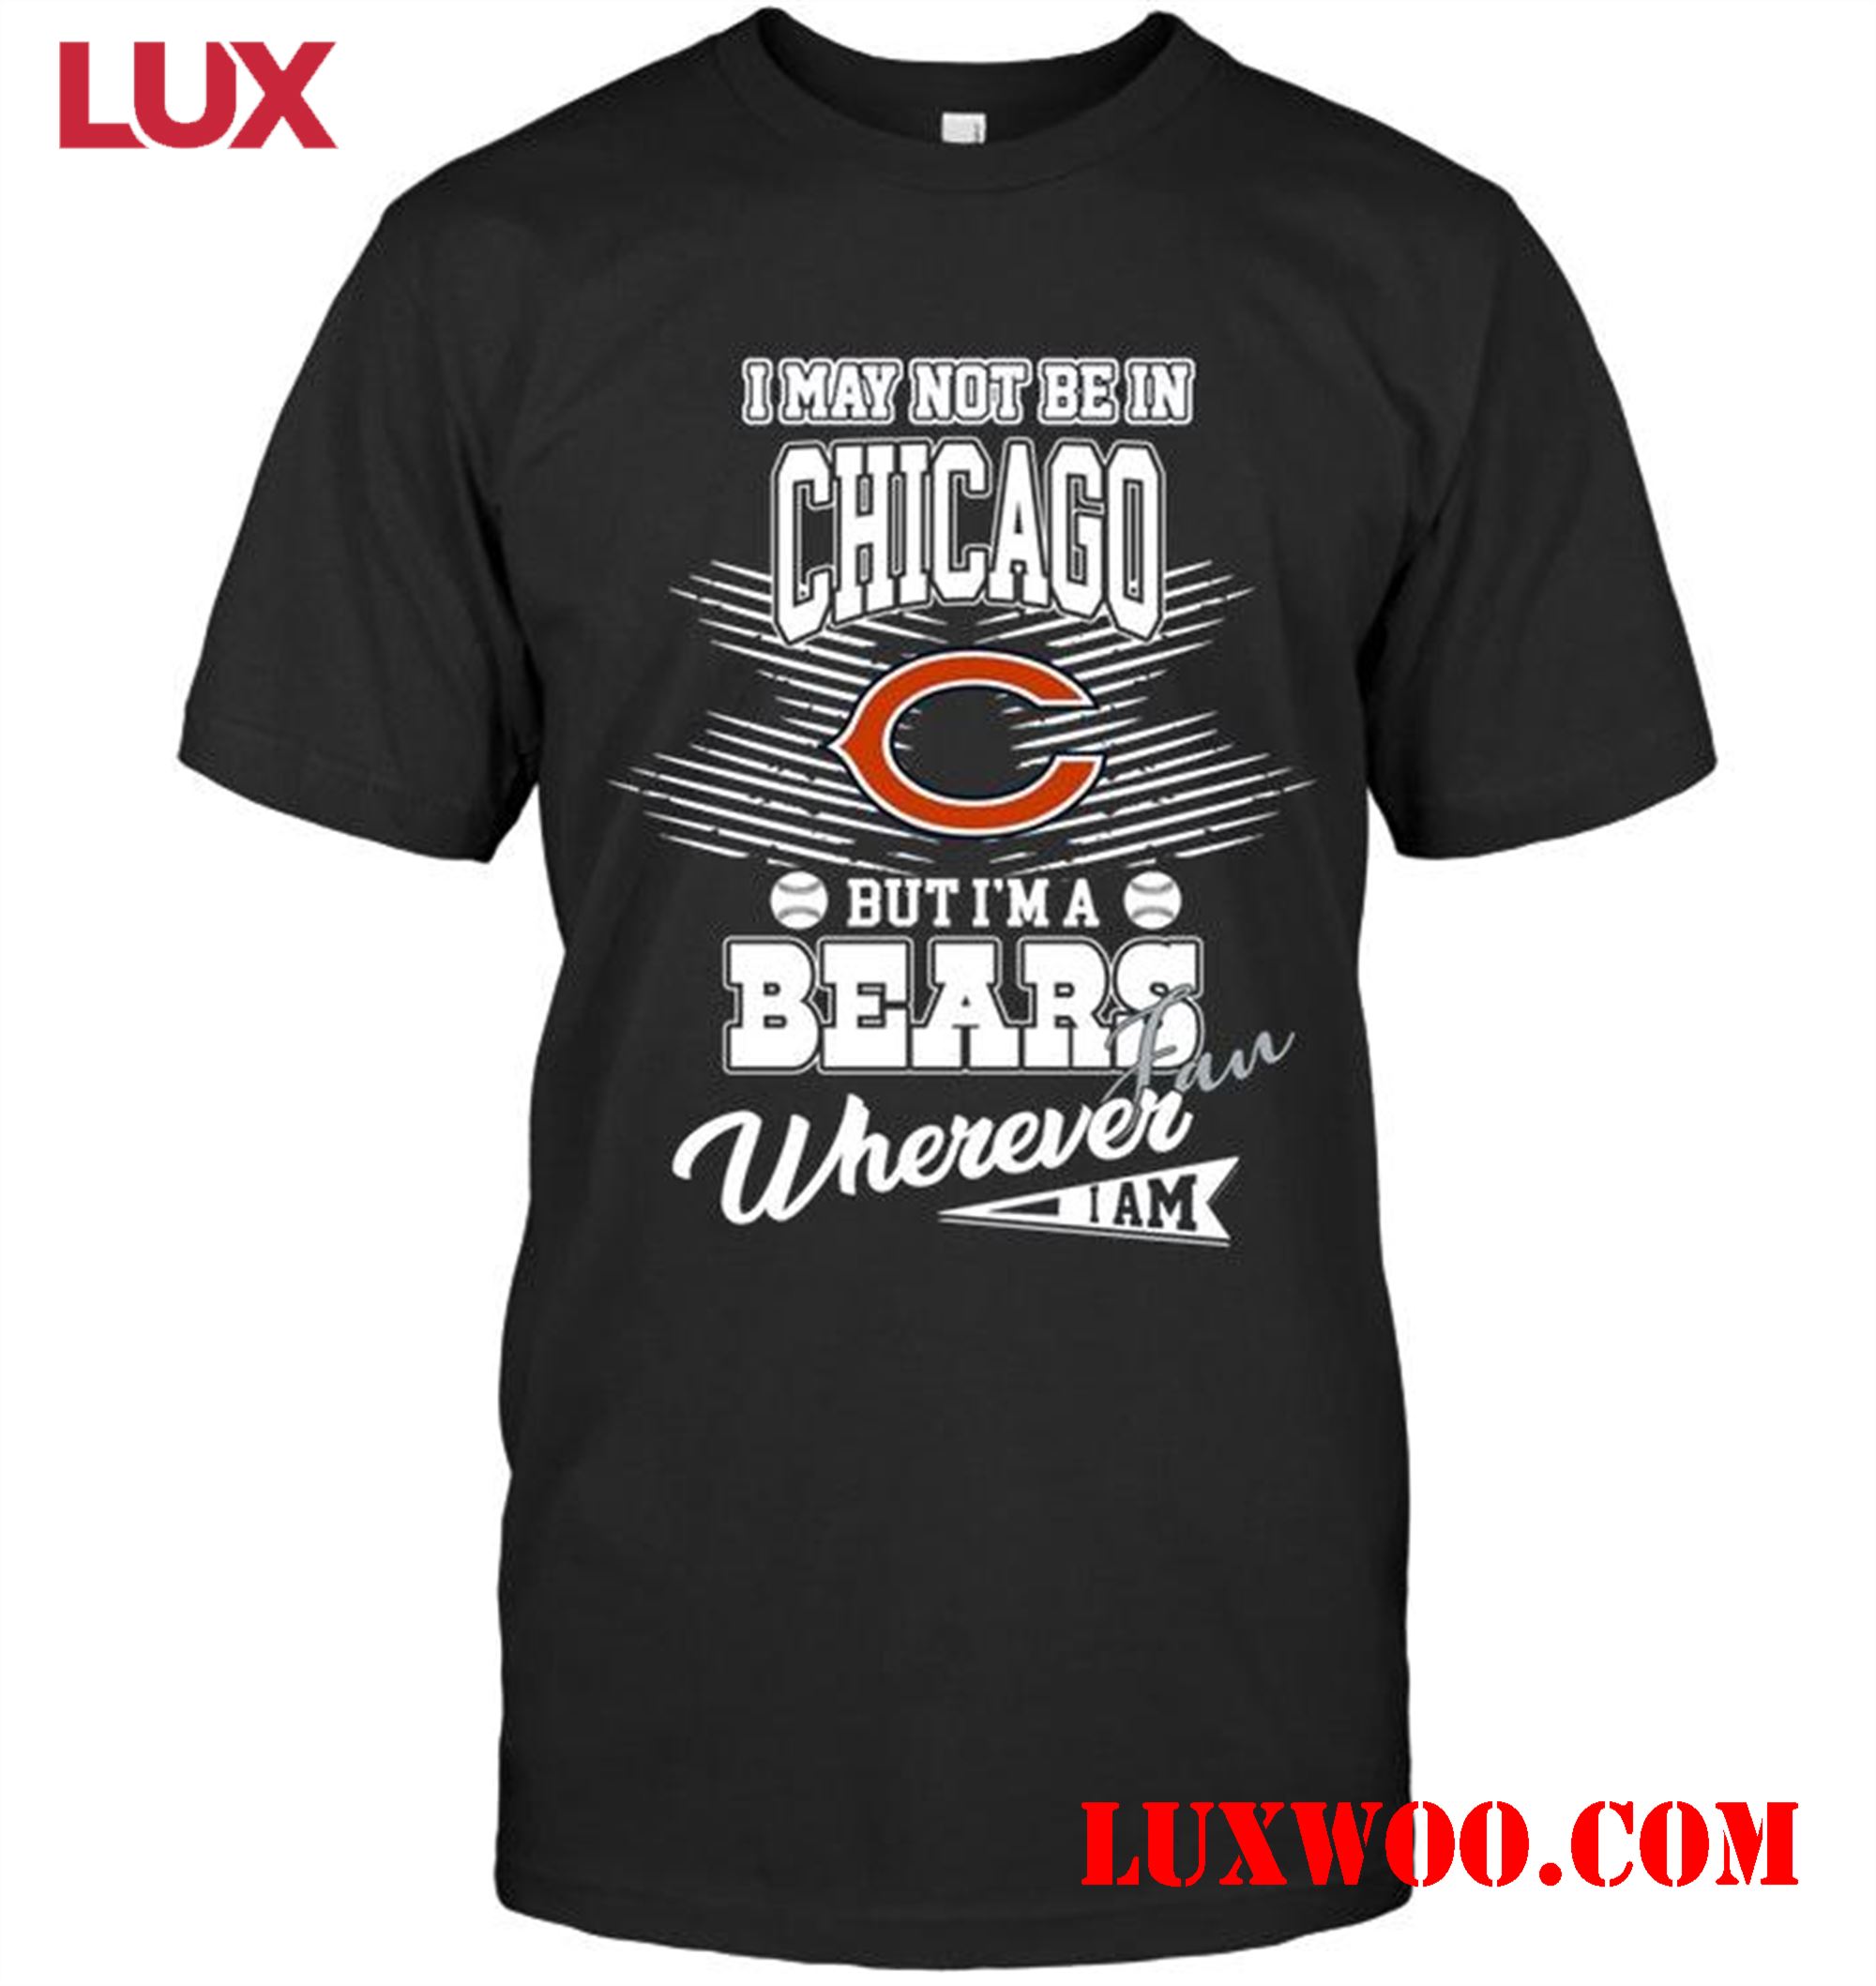 Nfl Chicago Bears I May Not Be In Chicago But Im A Chicago Bears Fan Whereever I Am Shirt 